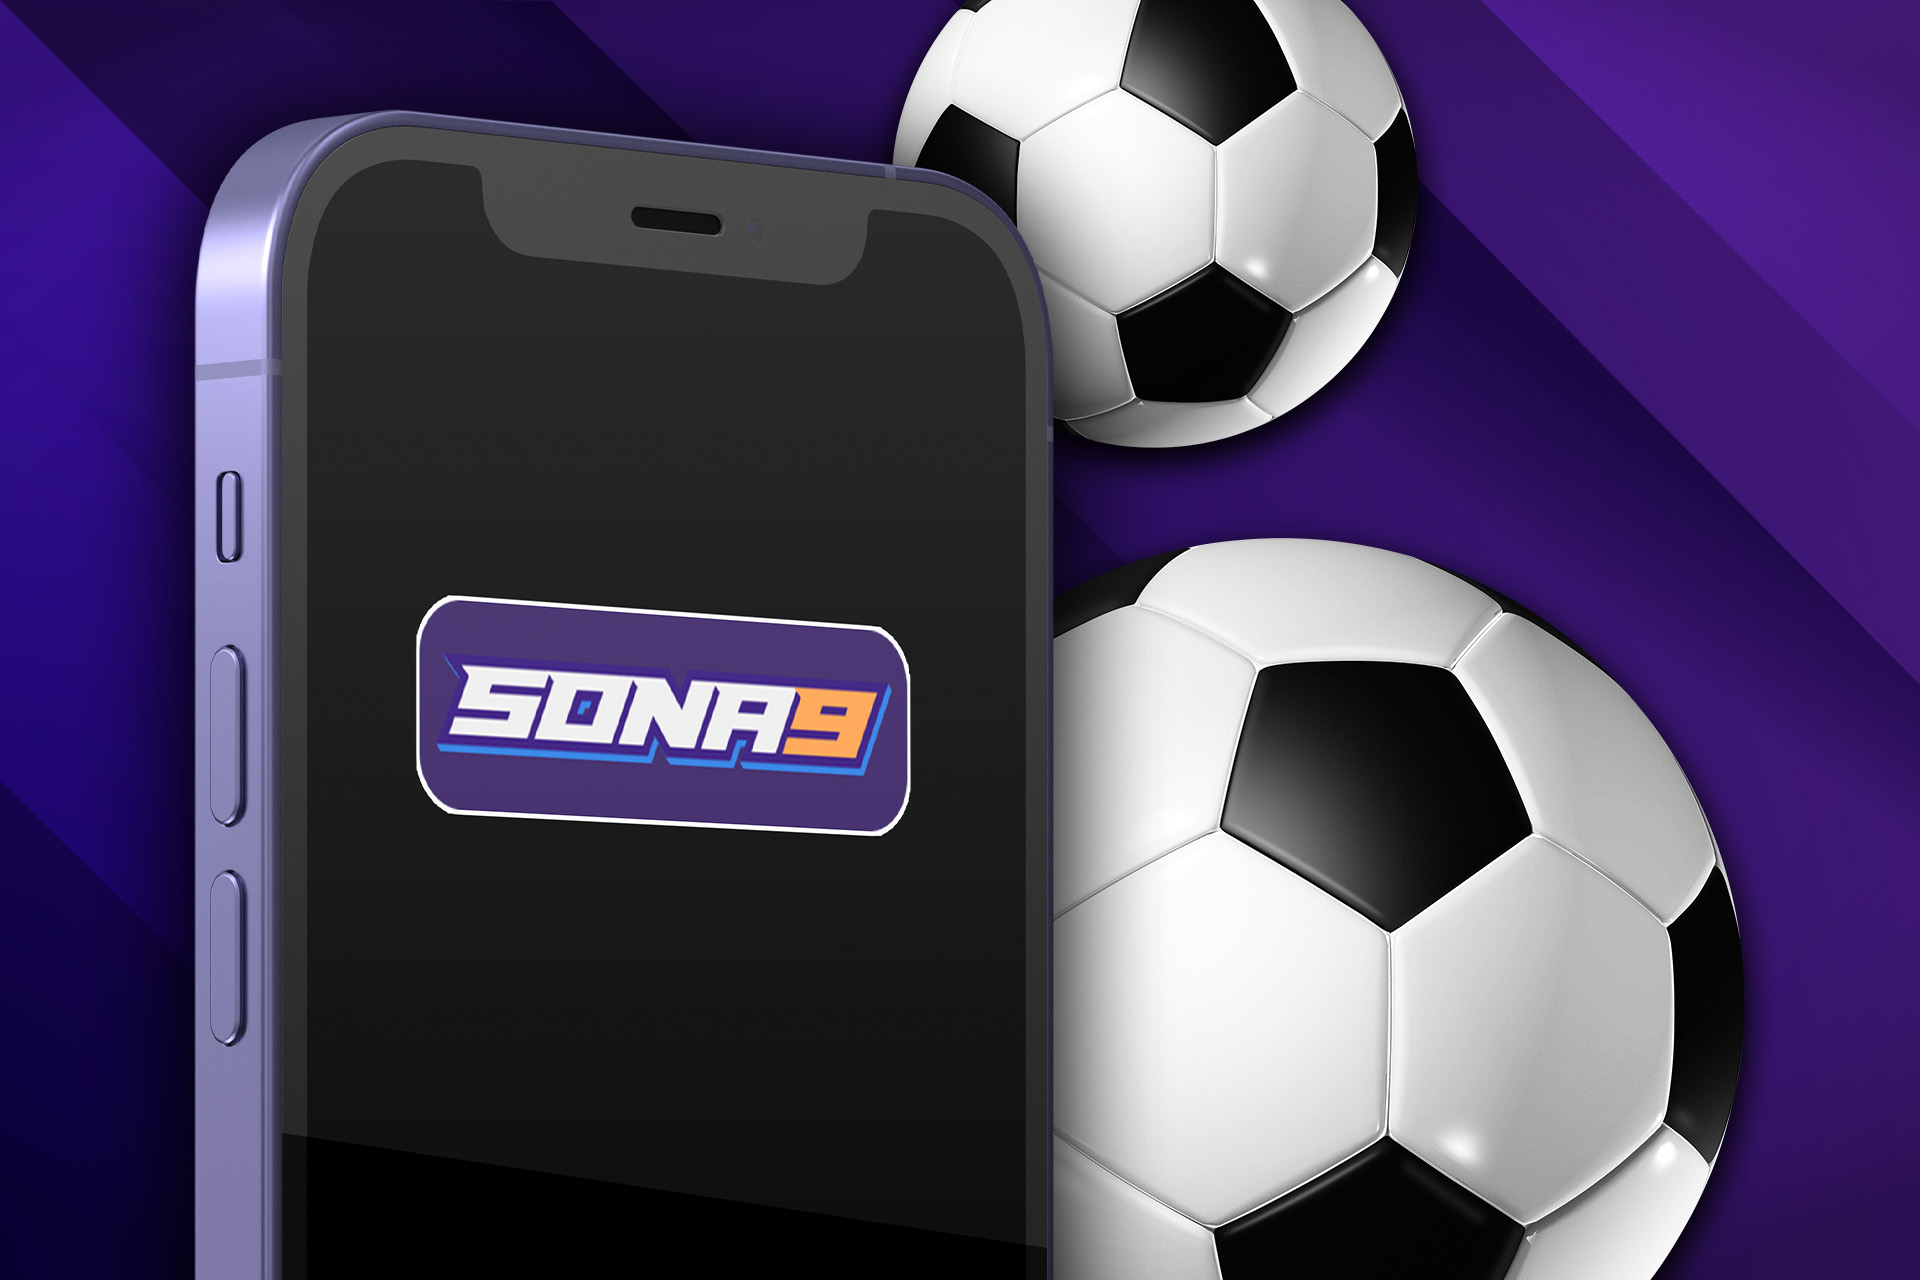 You can also place bets on football in the Sona9 mobile app.